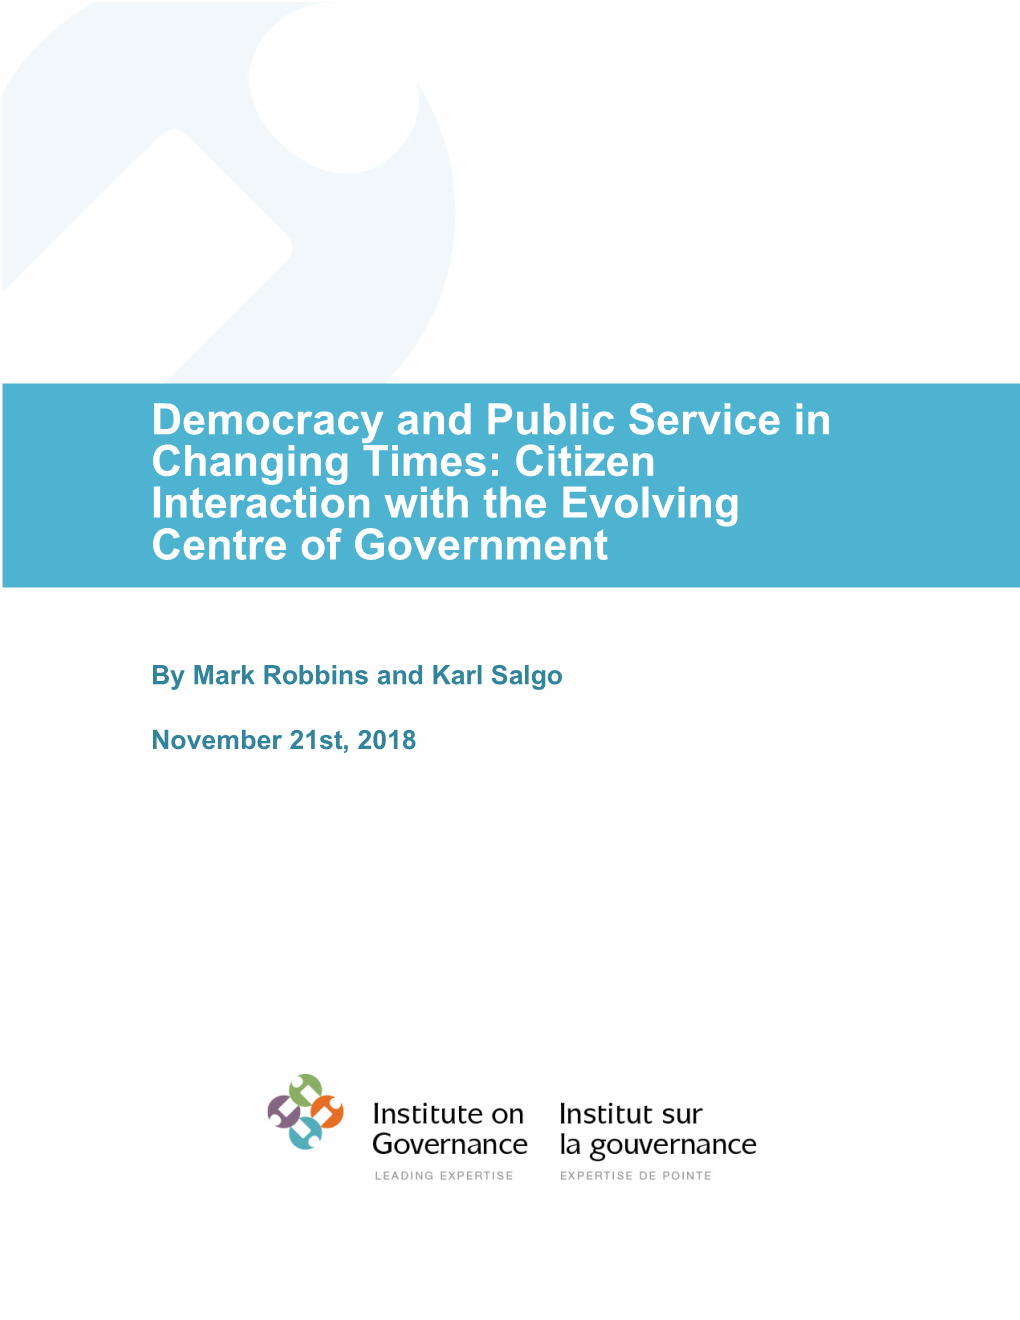 Democracy and Public Service in Changing Times: Citizen Interaction with the Evolving Centre of Government